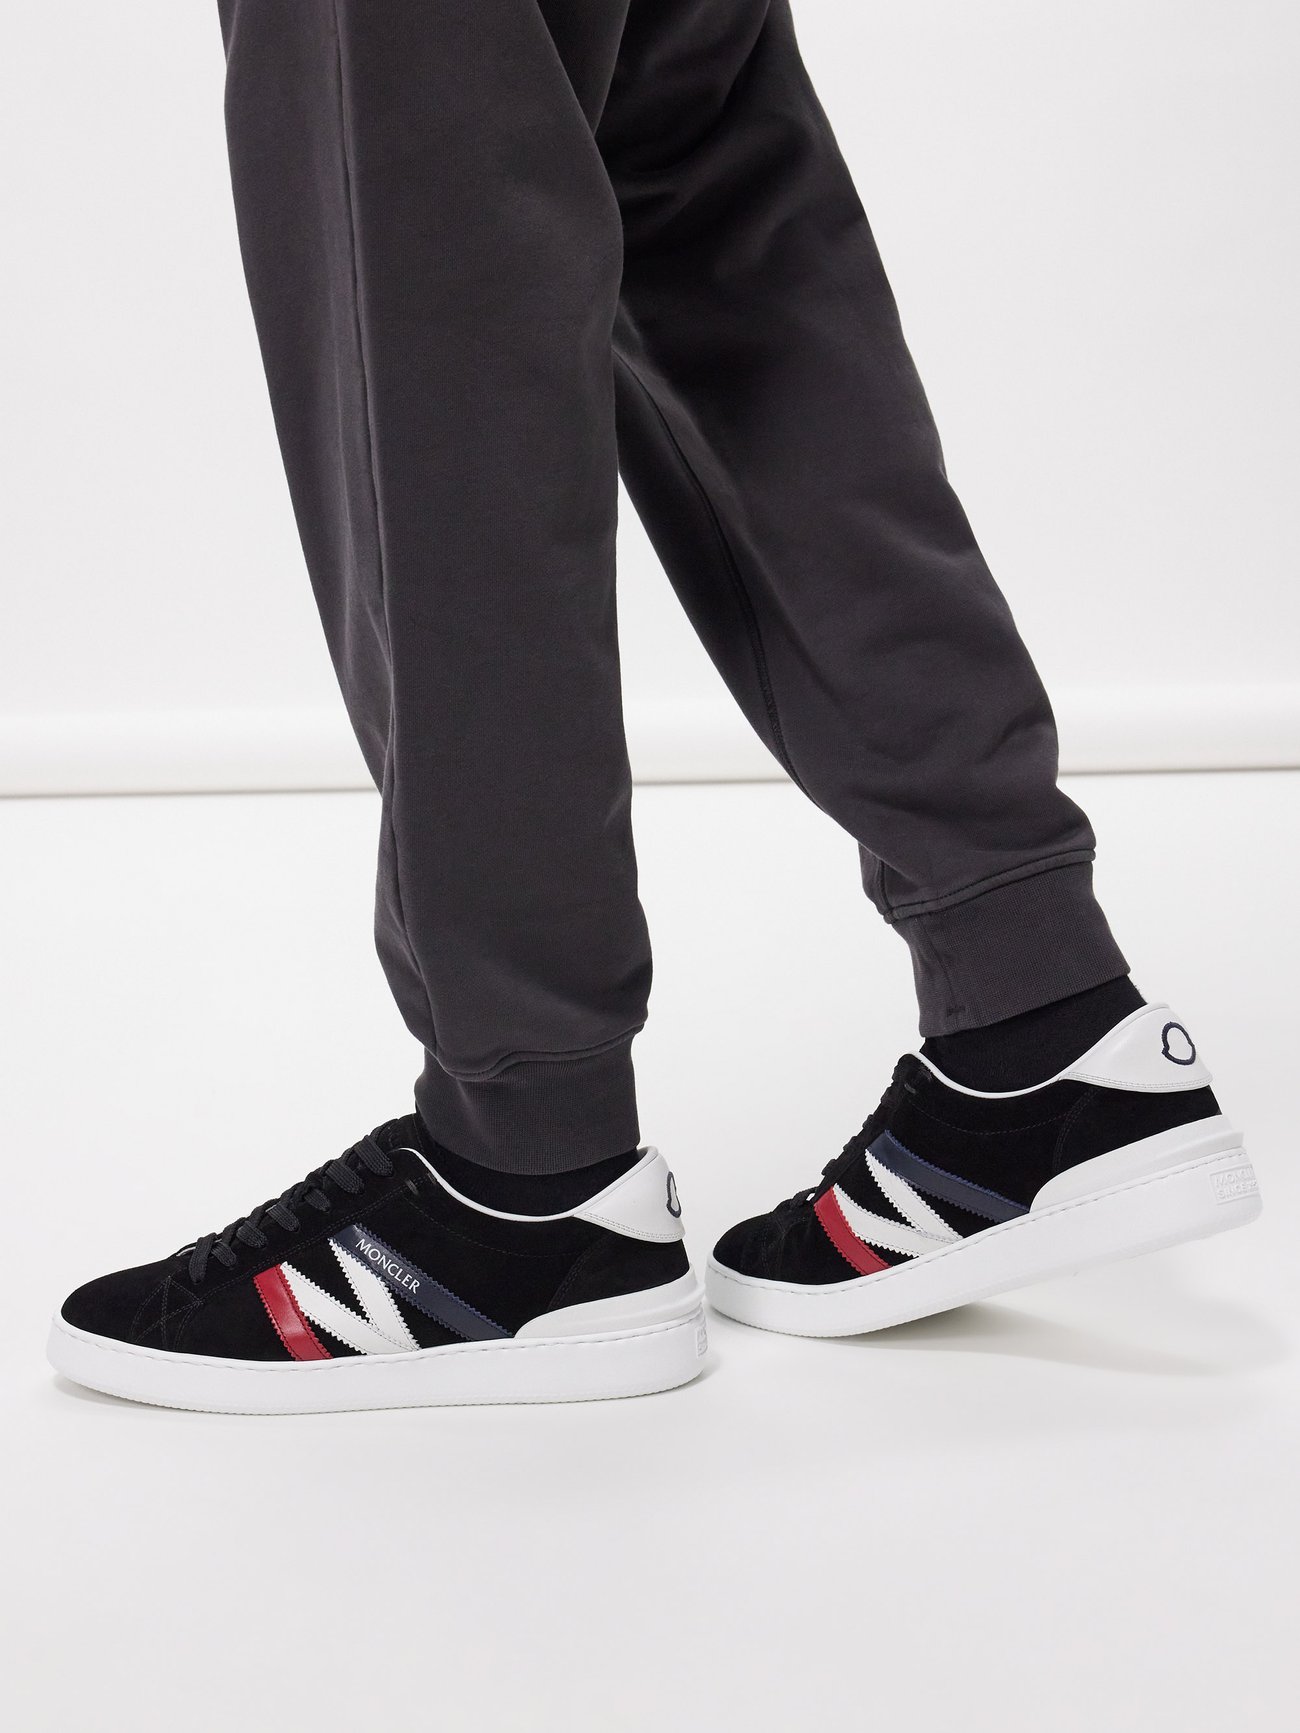 Moncler New Monaco Sneakers White at CareOfCarl.com